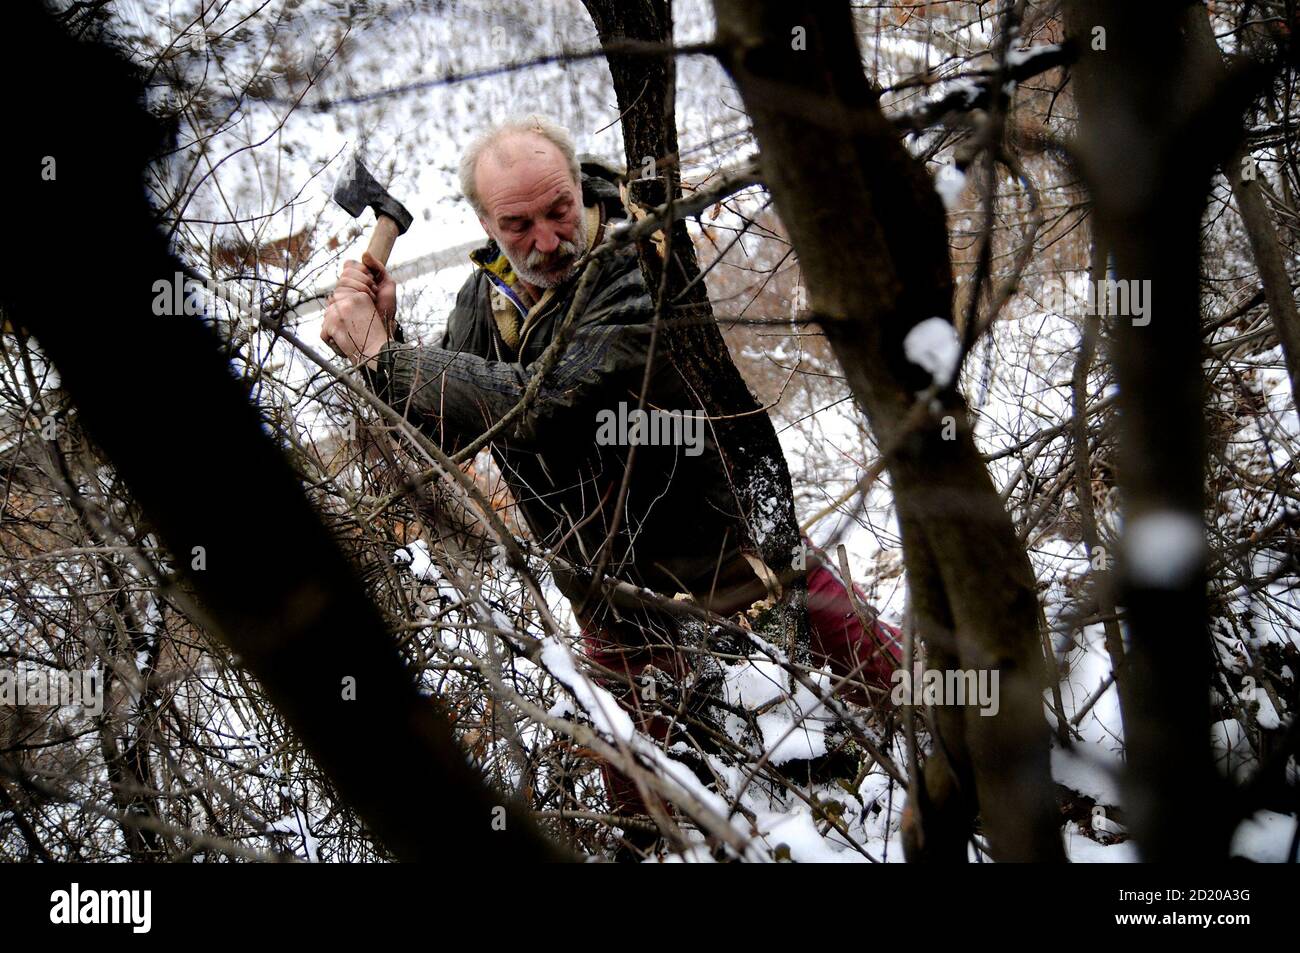 Bosnia Croat Zarko Hrgic, 51, splits wood in a forest in the village of Babino January 31, 2010. Hrgic has been living in a cave for three years in Babino near the central Bosnian town of Zenica, 50 miles northeast of Sarajevo , where the temperature in the village dips to minus 17 degrees Celsius at night. He makes a living by selling wood for 15 euros ($20.80) per metre.  REUTERS/Dado Ruvic (BOSNIA AND HERZEGOVINA - Tags: SOCIETY ENVIRONMENT) Stock Photo